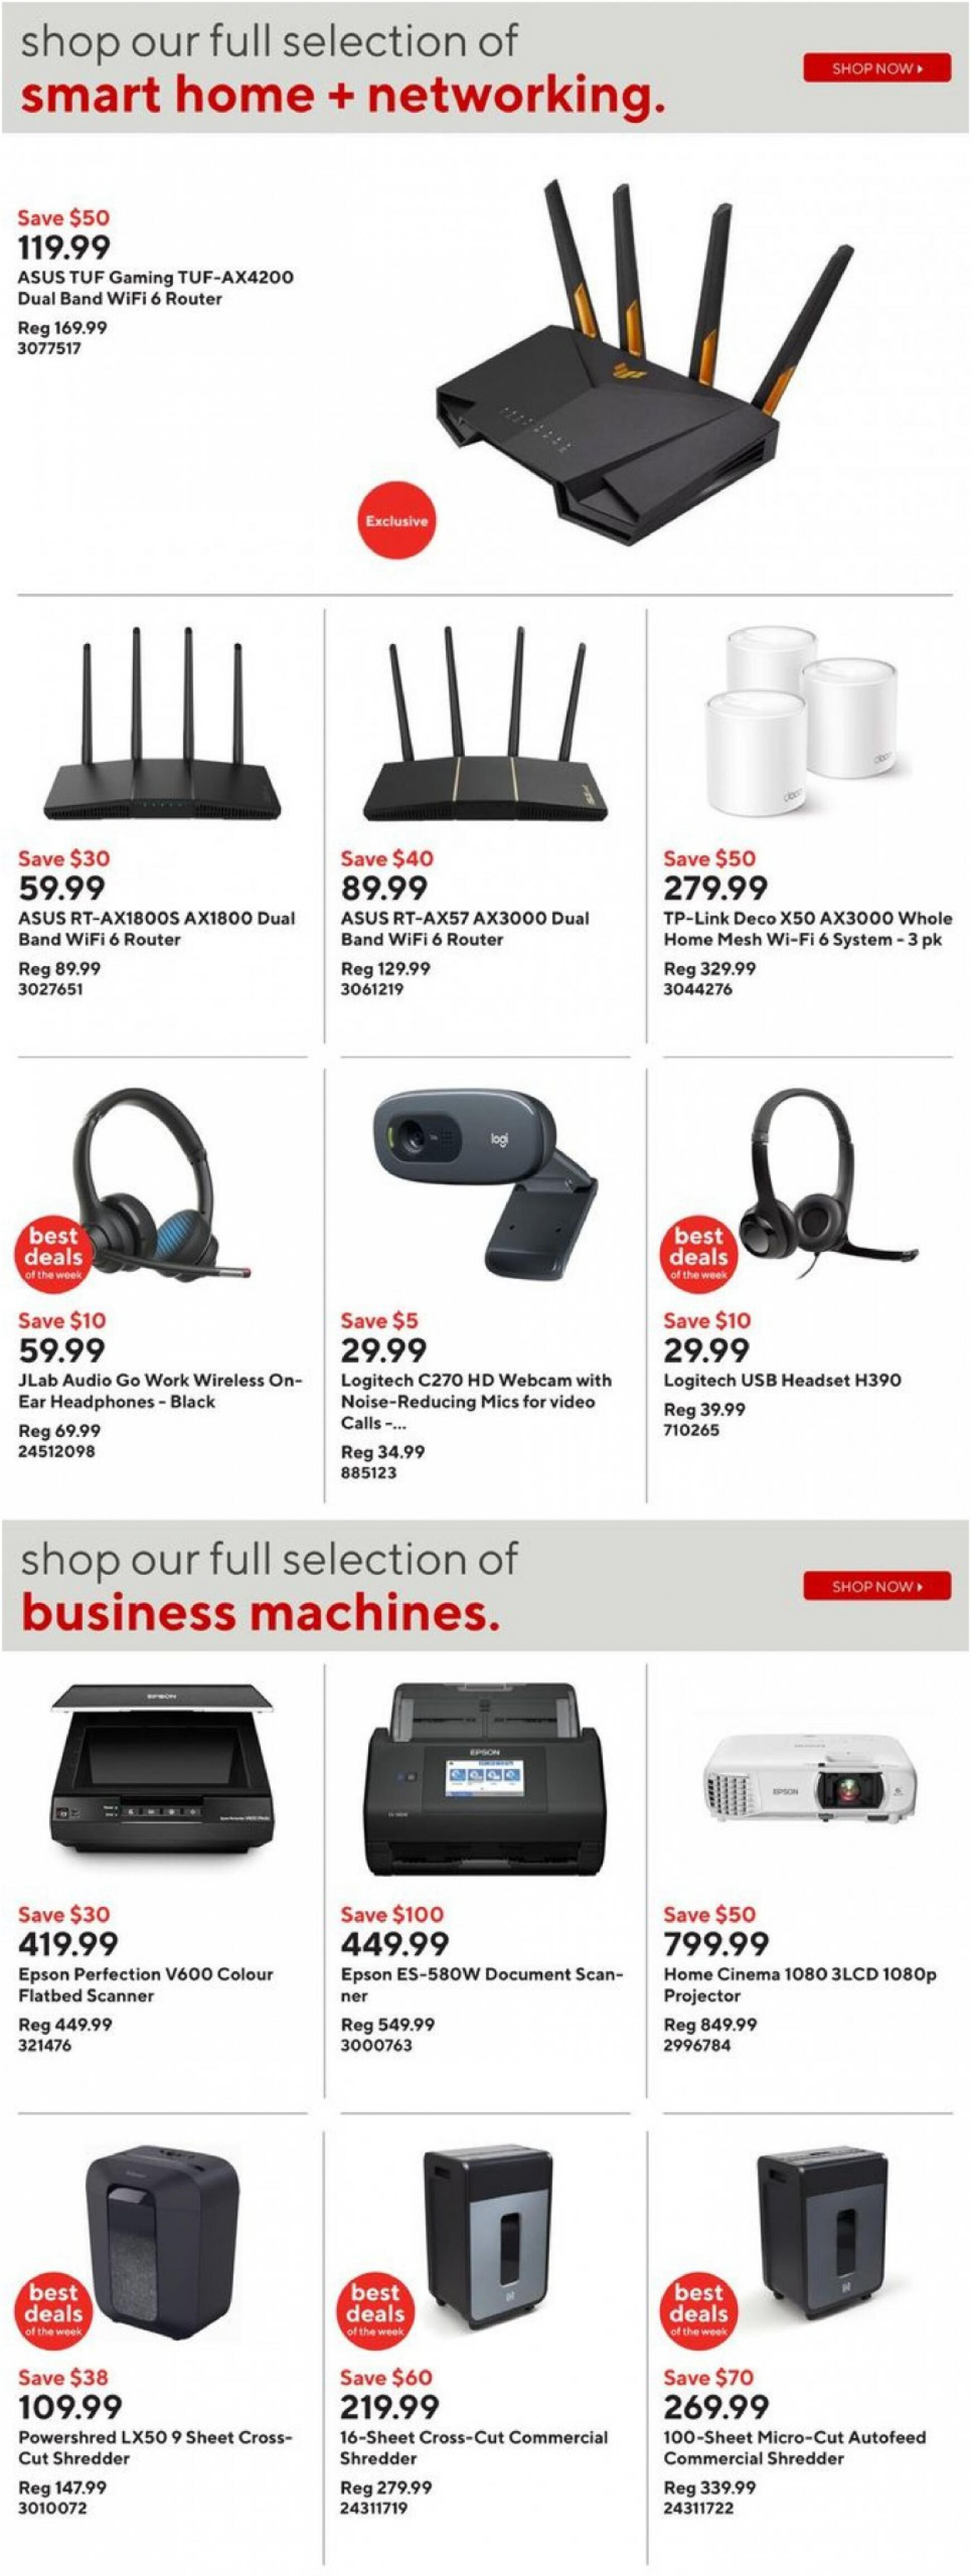 staples - Staples - Weekly flyer current 10.04. - 17.04. - page: 12